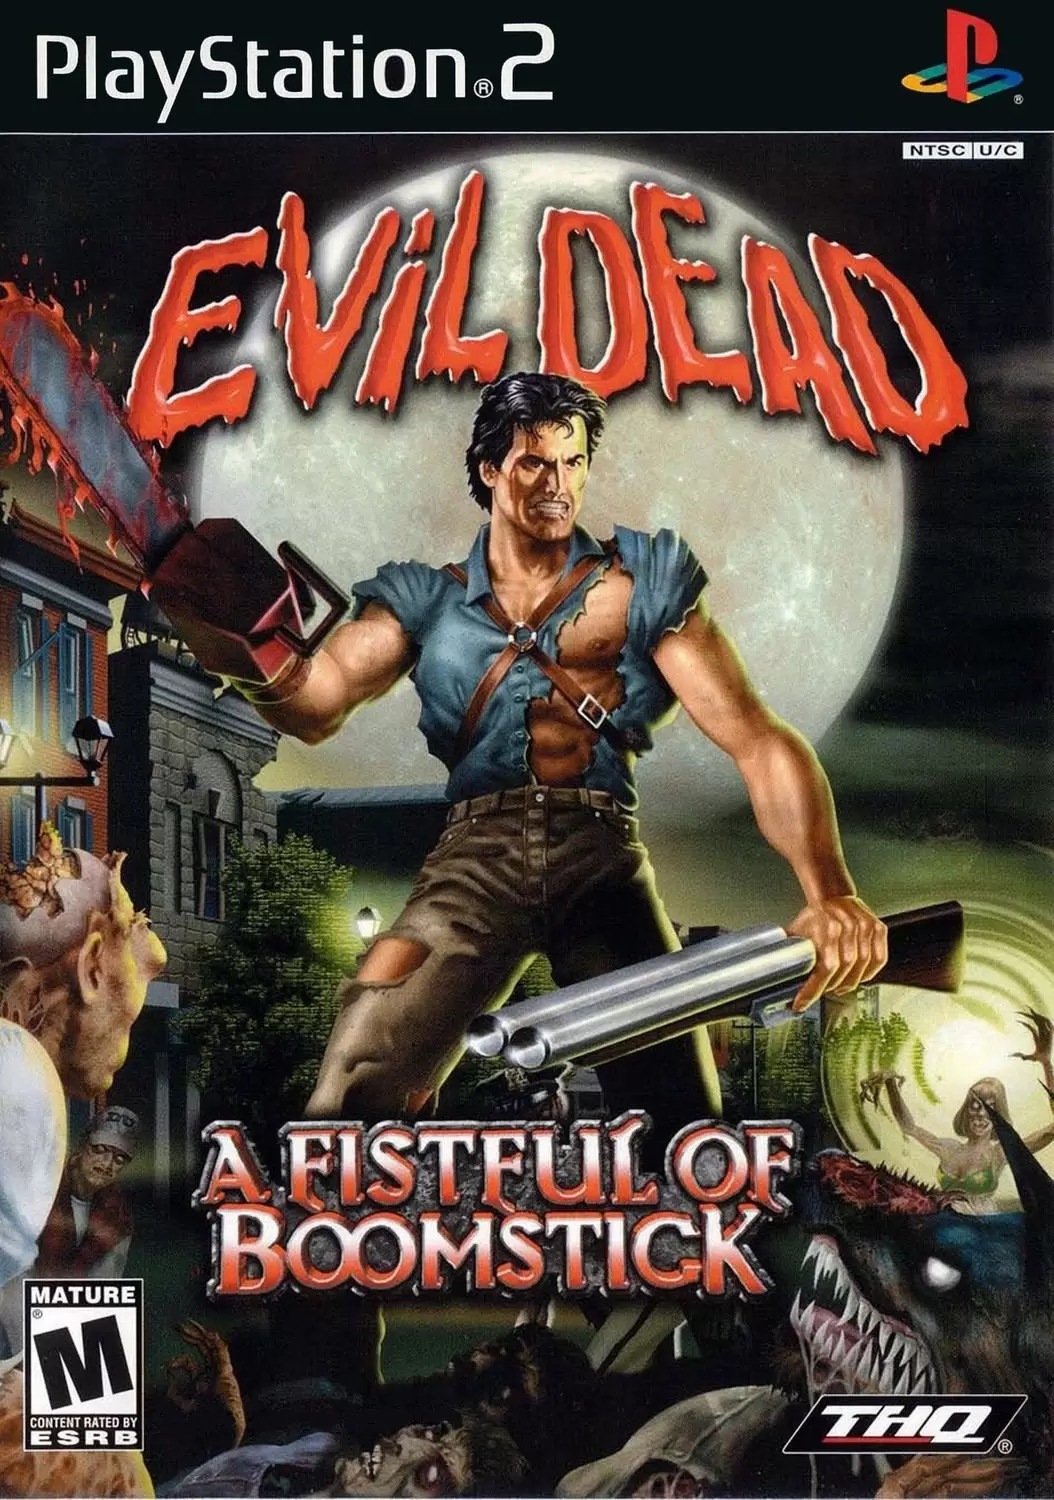 PS2 Games - Evil Dead: A Fistful of Boomstick